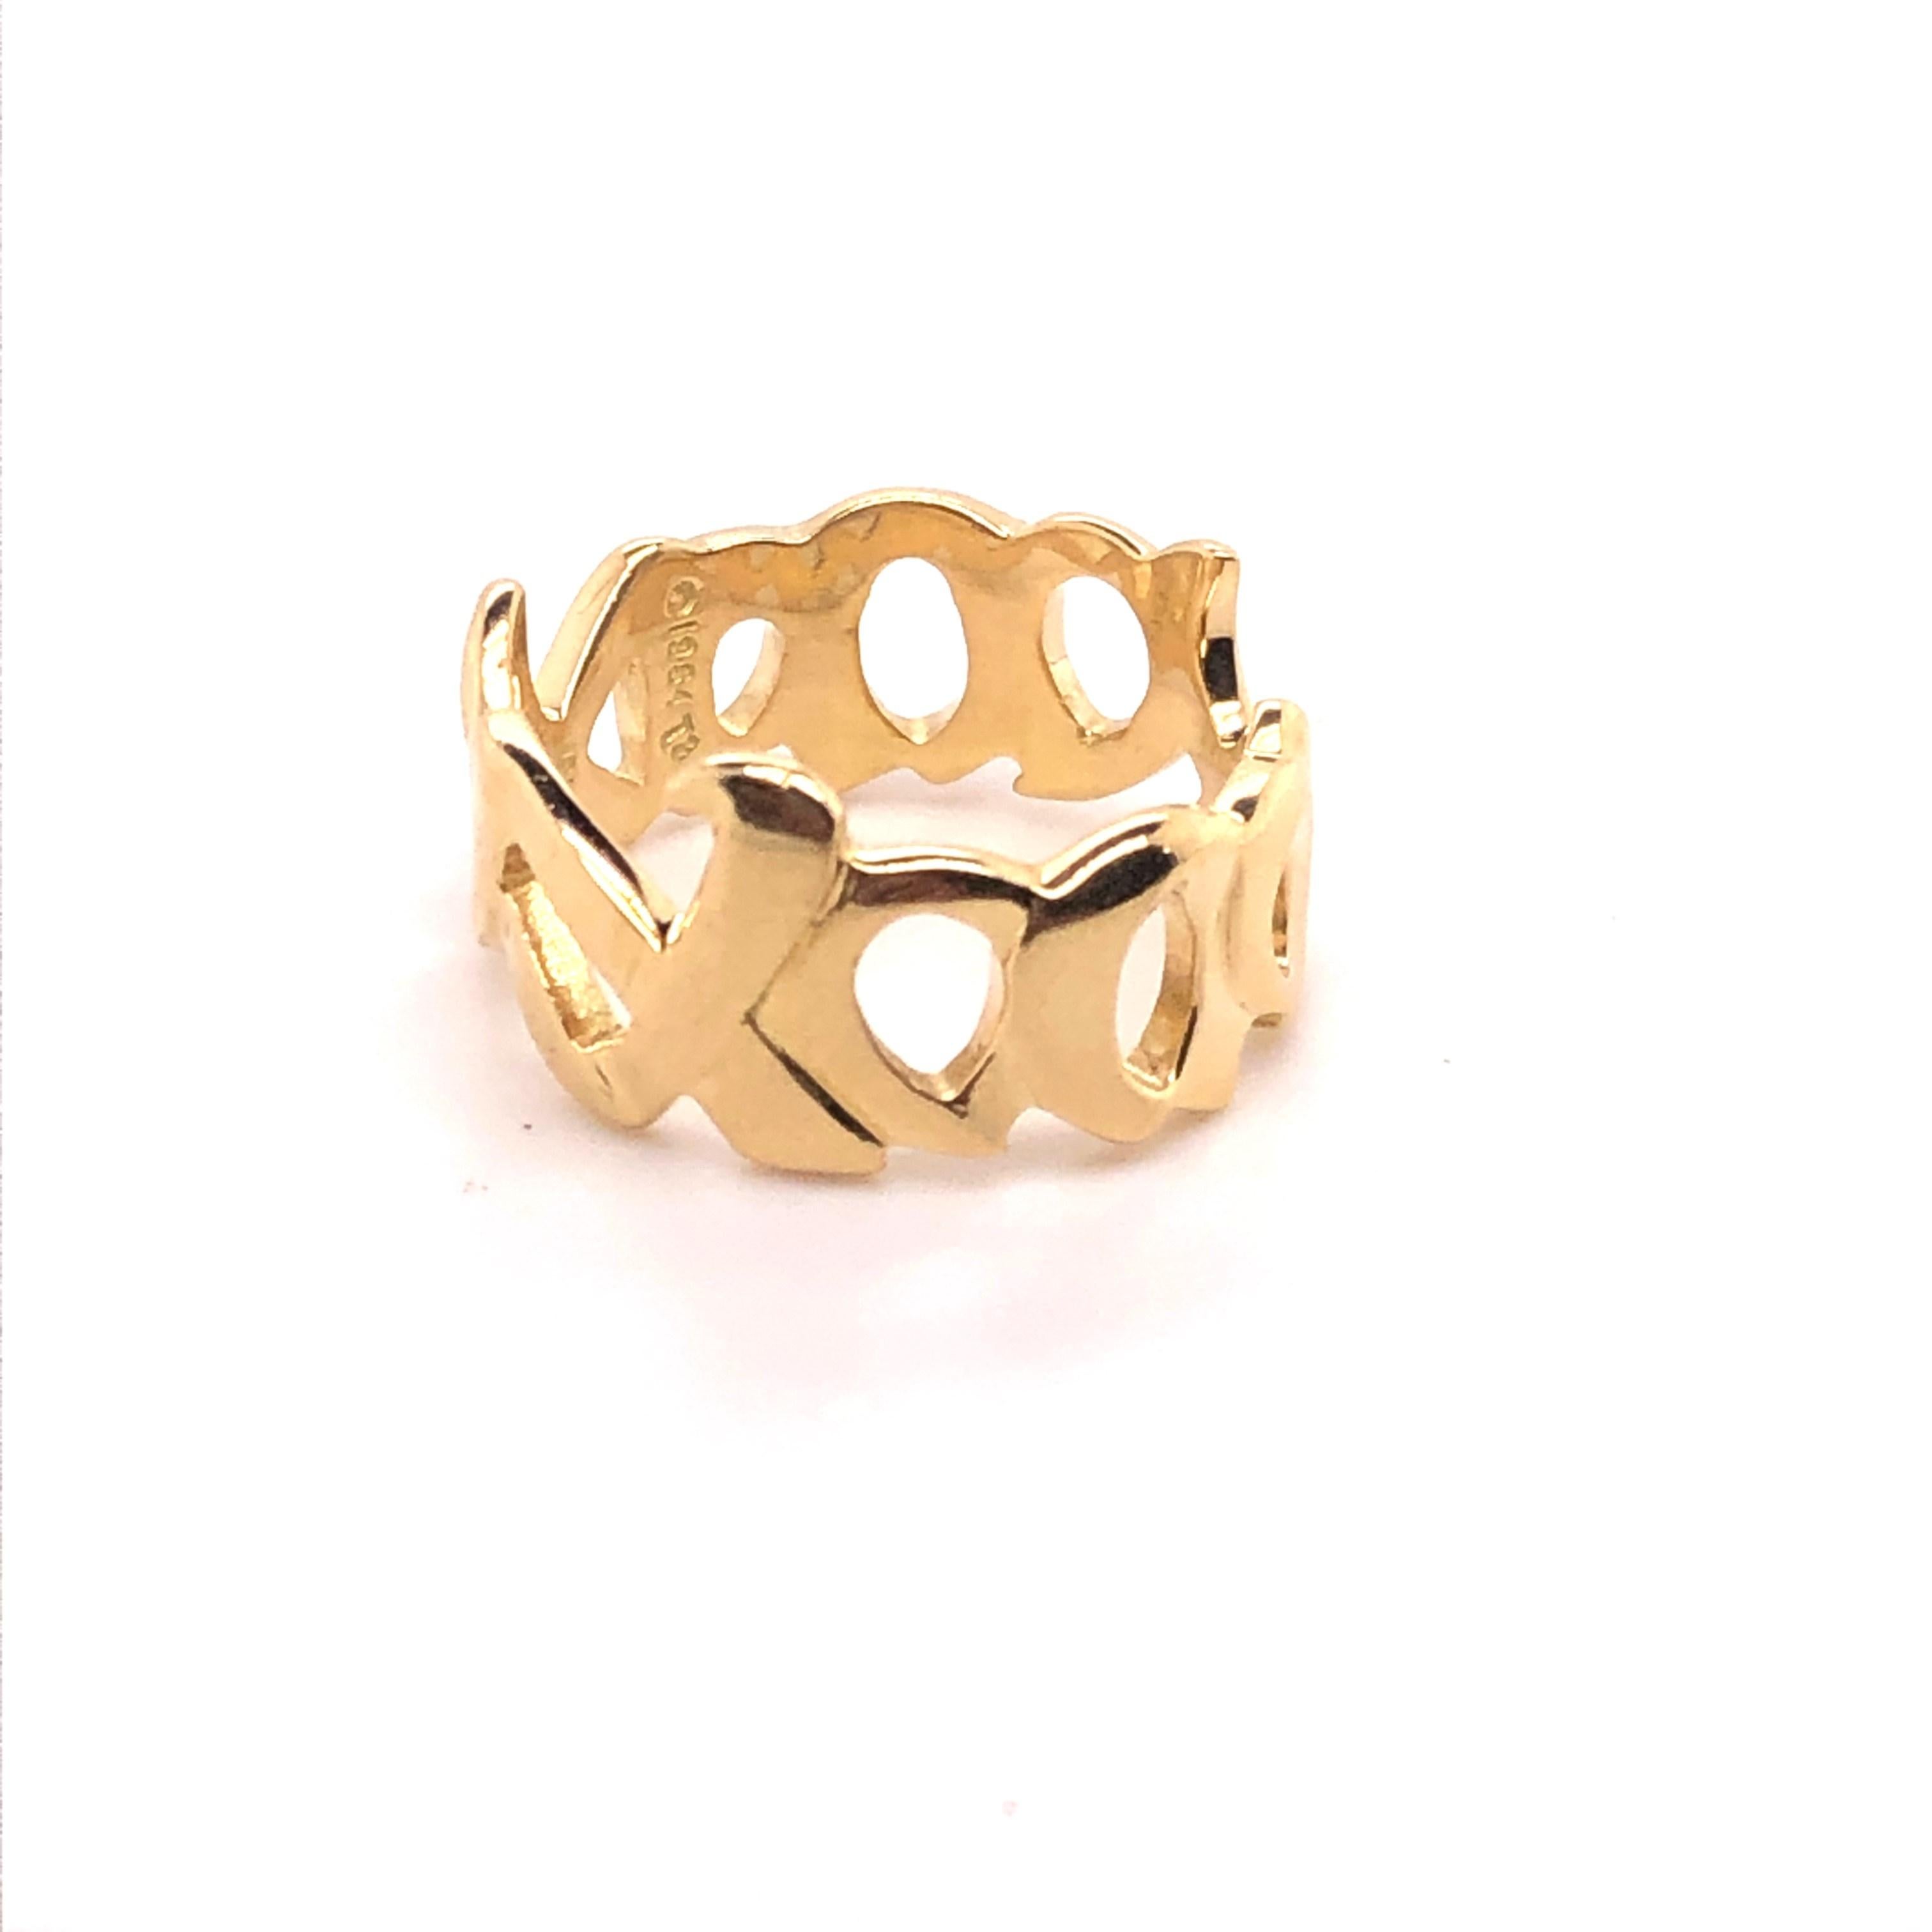 Fashioned in buttery 18kt yellow gold, this classic Tiffany and Co 